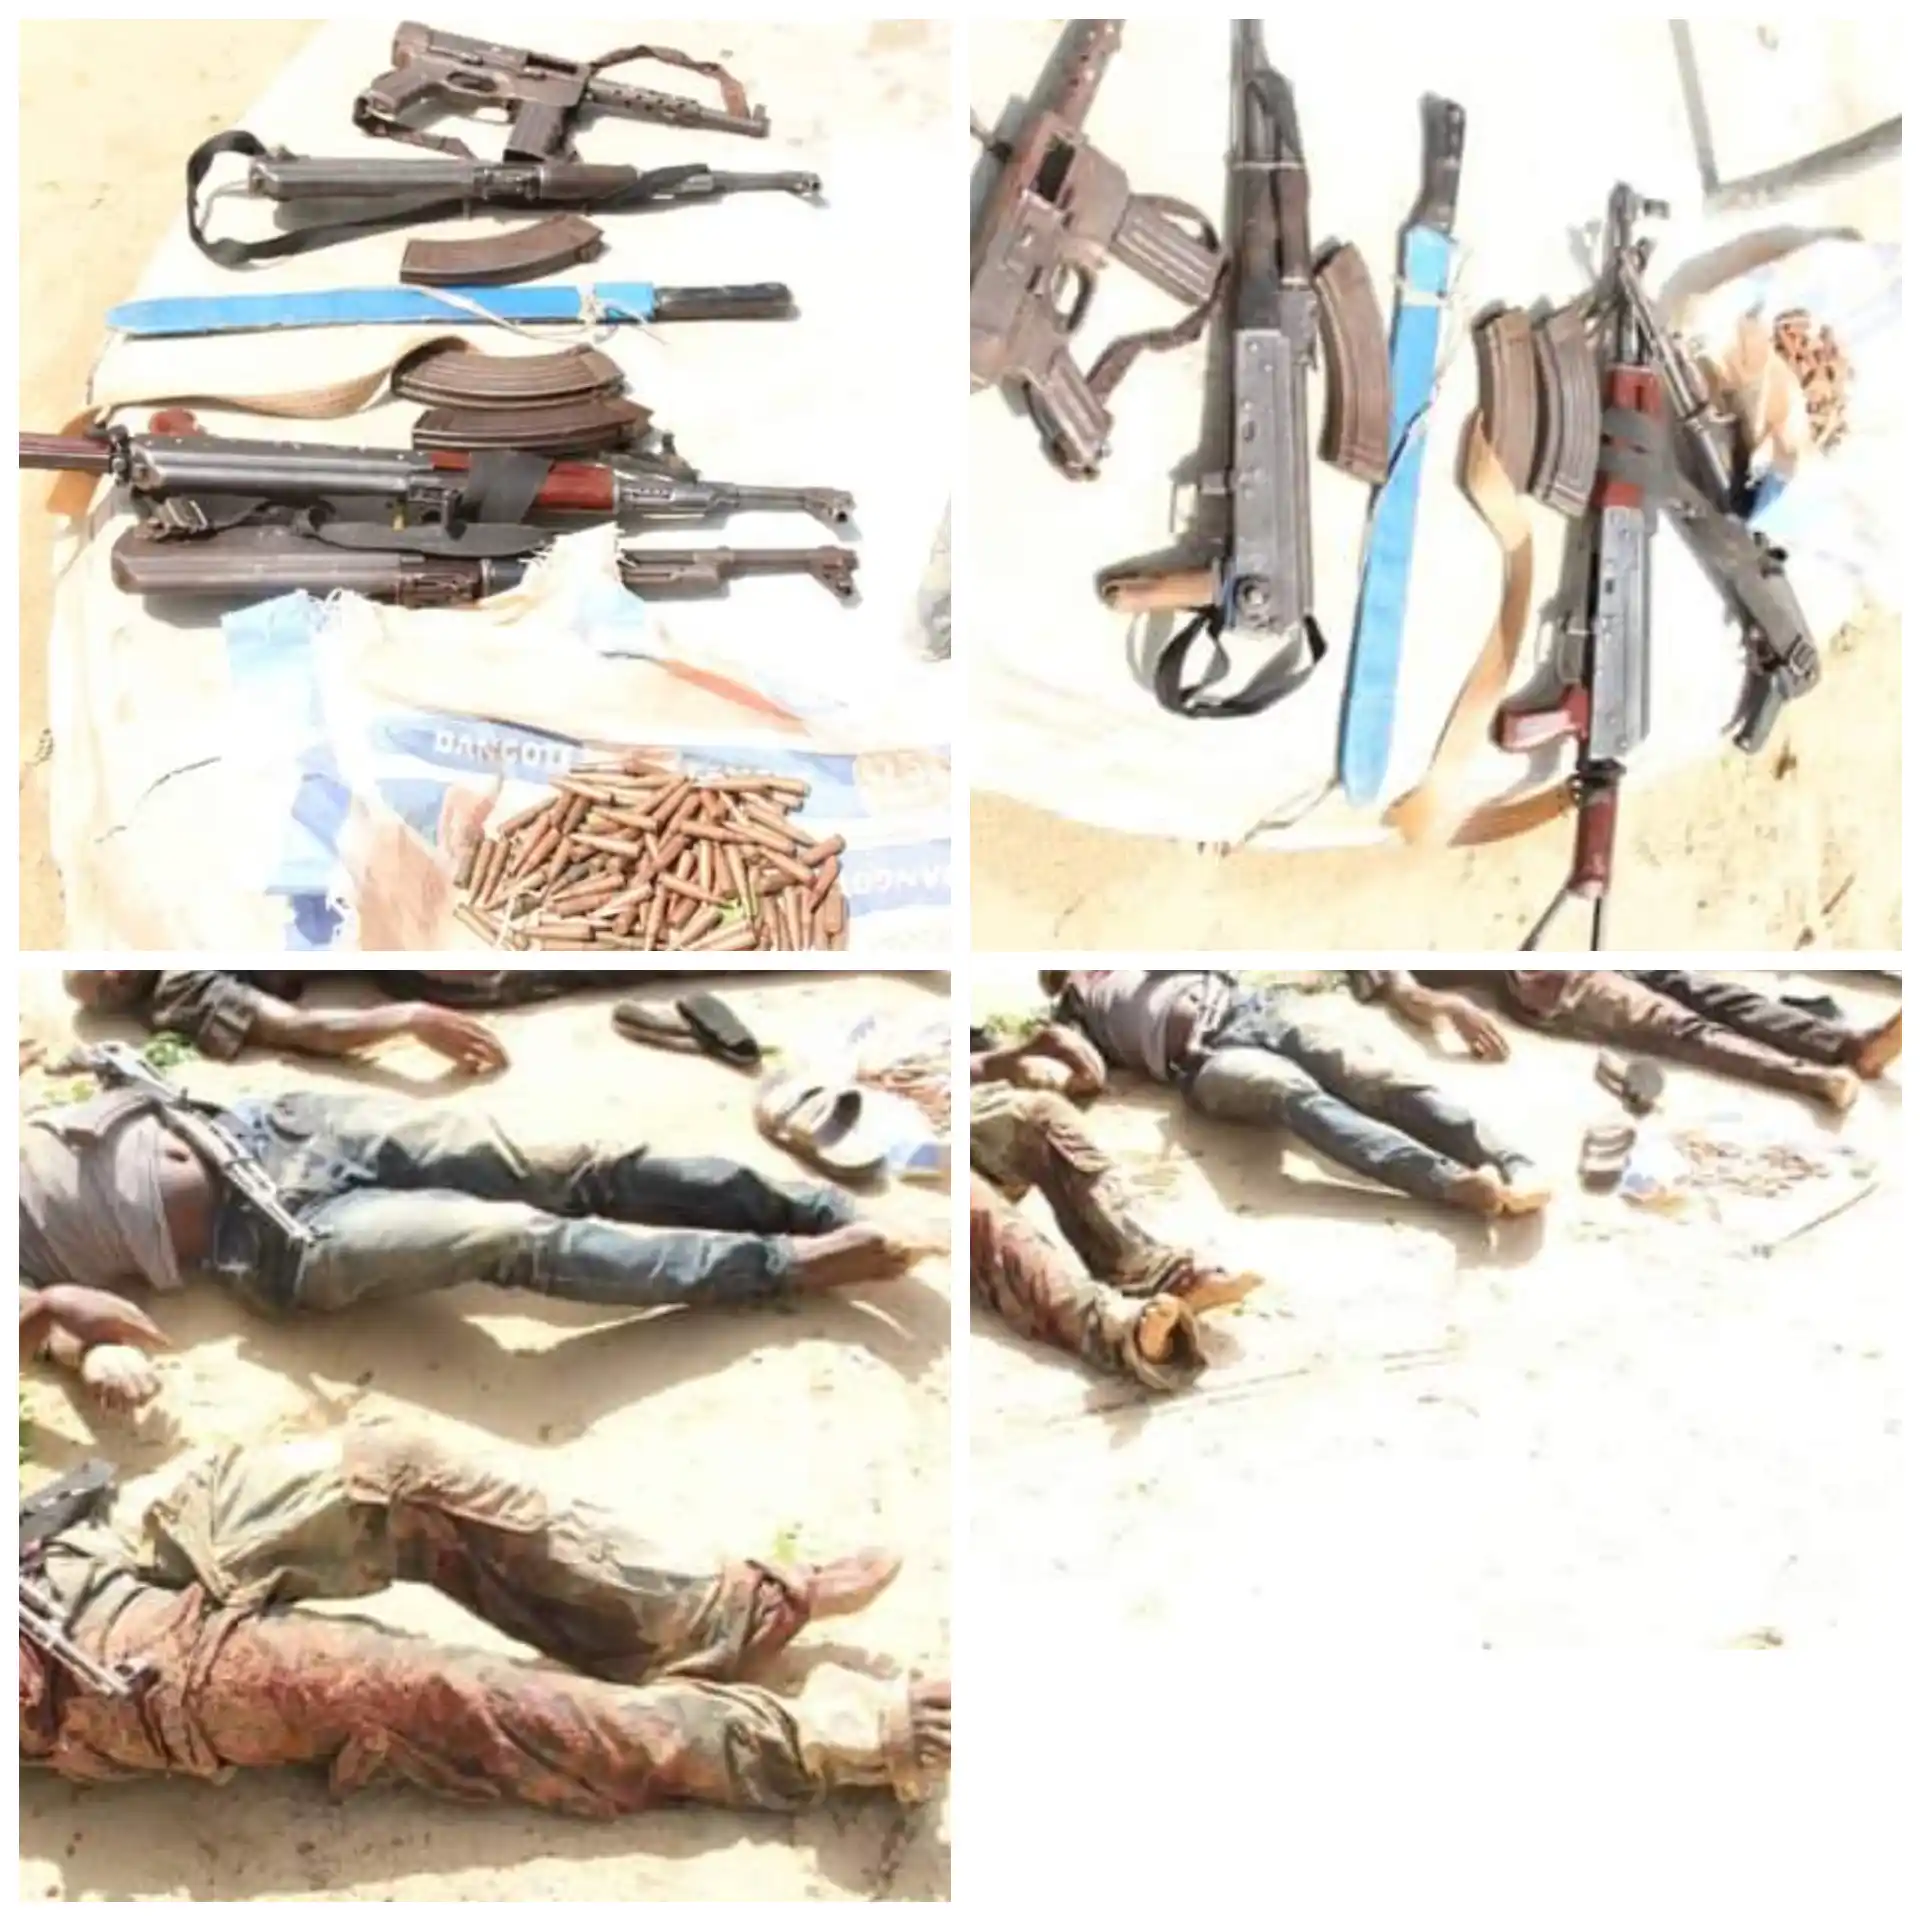 Bauchi police neutralize 5 suspected kidnappers, recover three AK-47 rifles and live ammunition